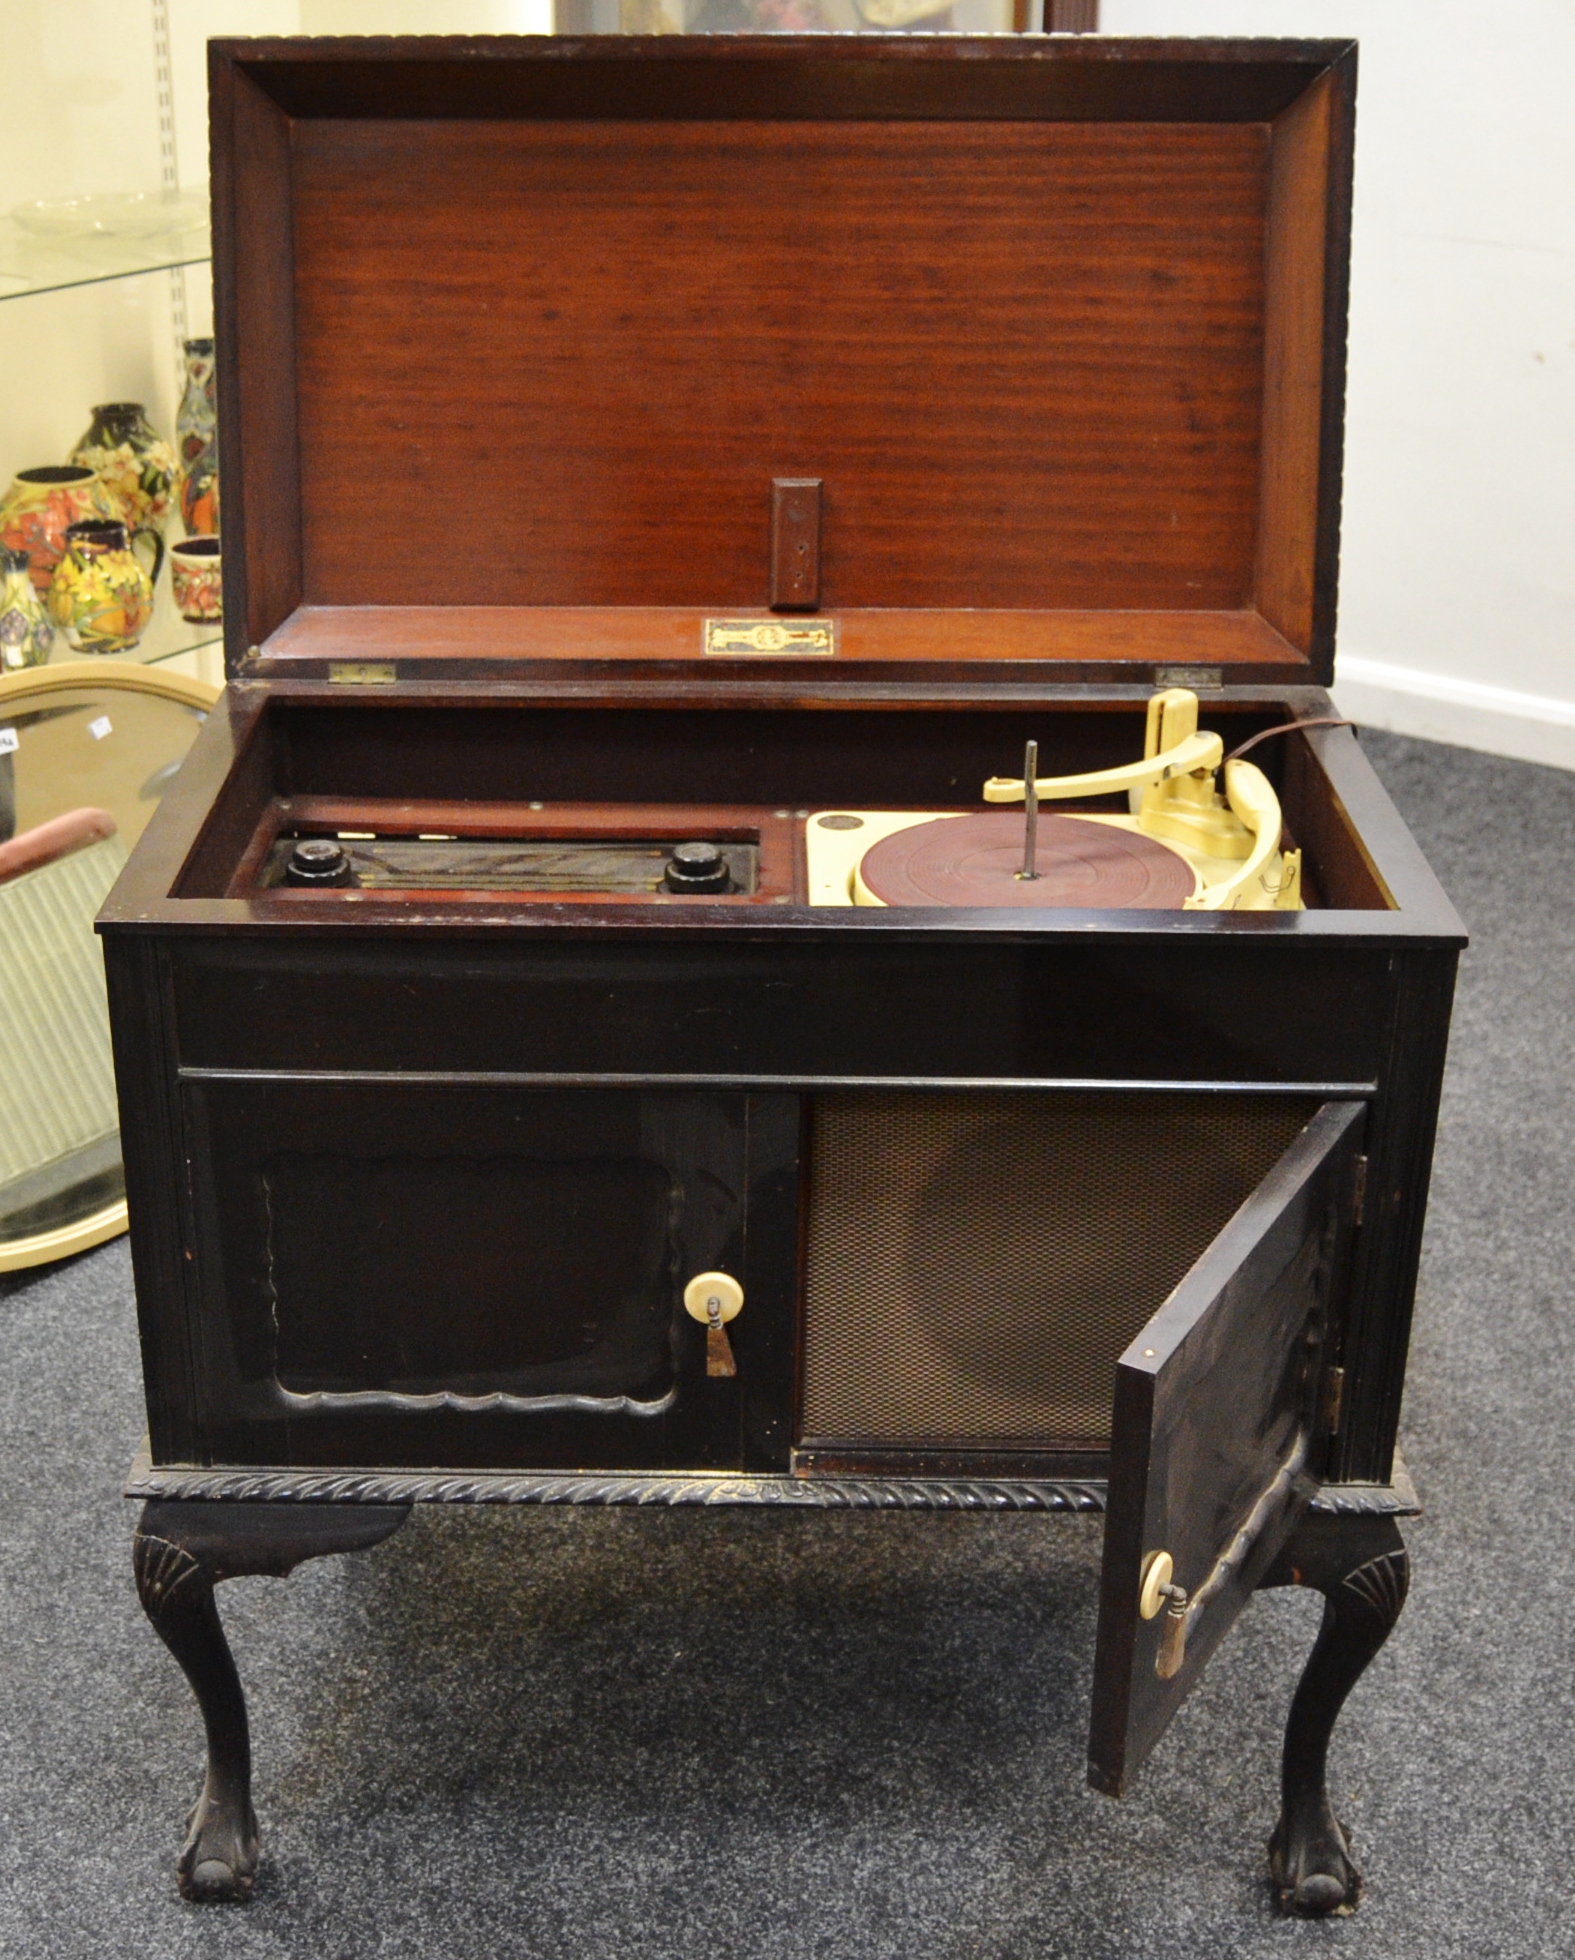 An early/mid 20th century cased Golden Memory radio and record player,